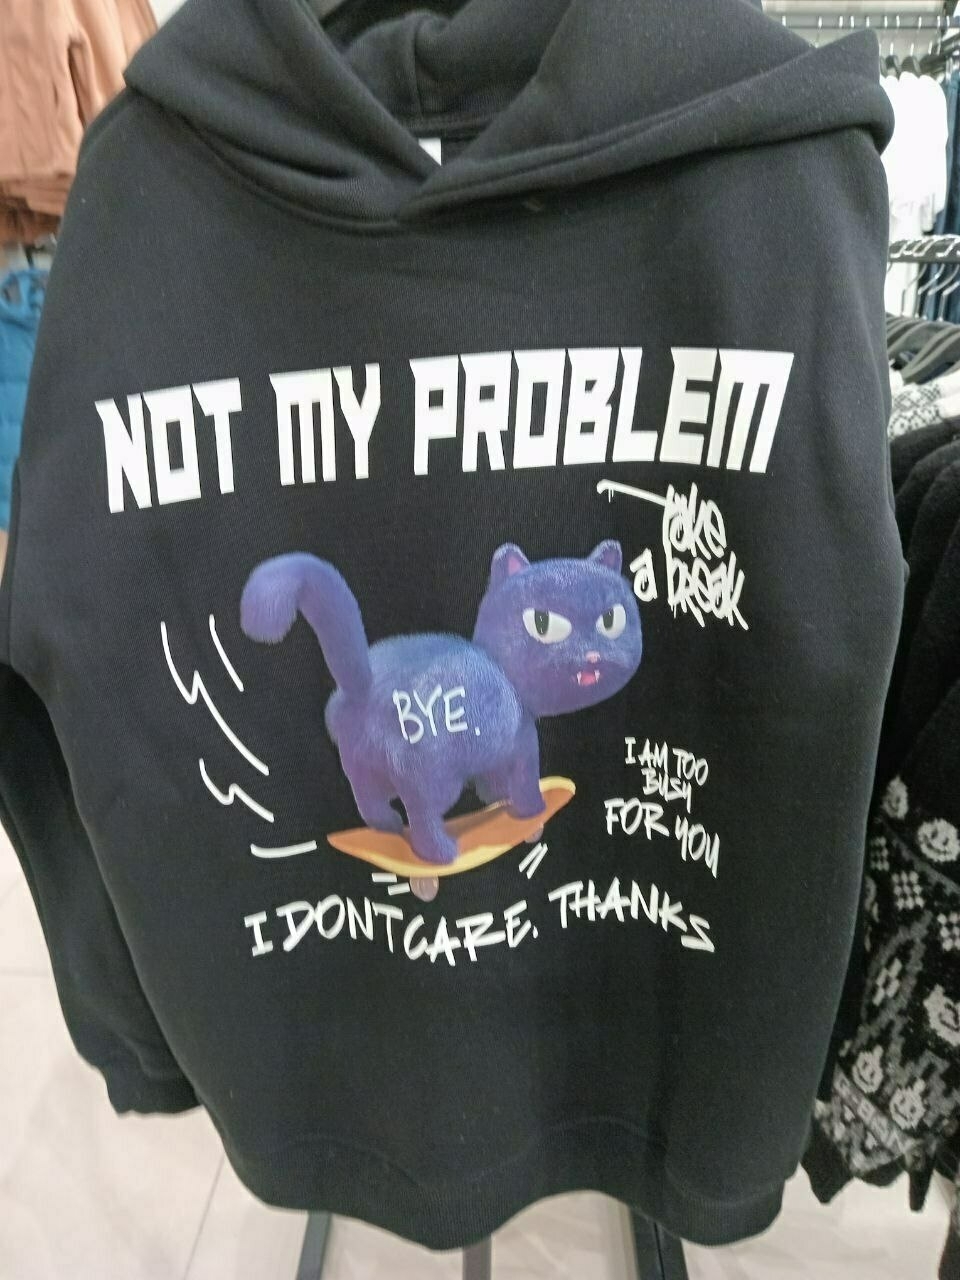 black hoodie with a blue cat skating away on a skateboard. white text: "Not my problem", "Take a break", "Bye.", "I am too busy for you", "I don't care, thanks"